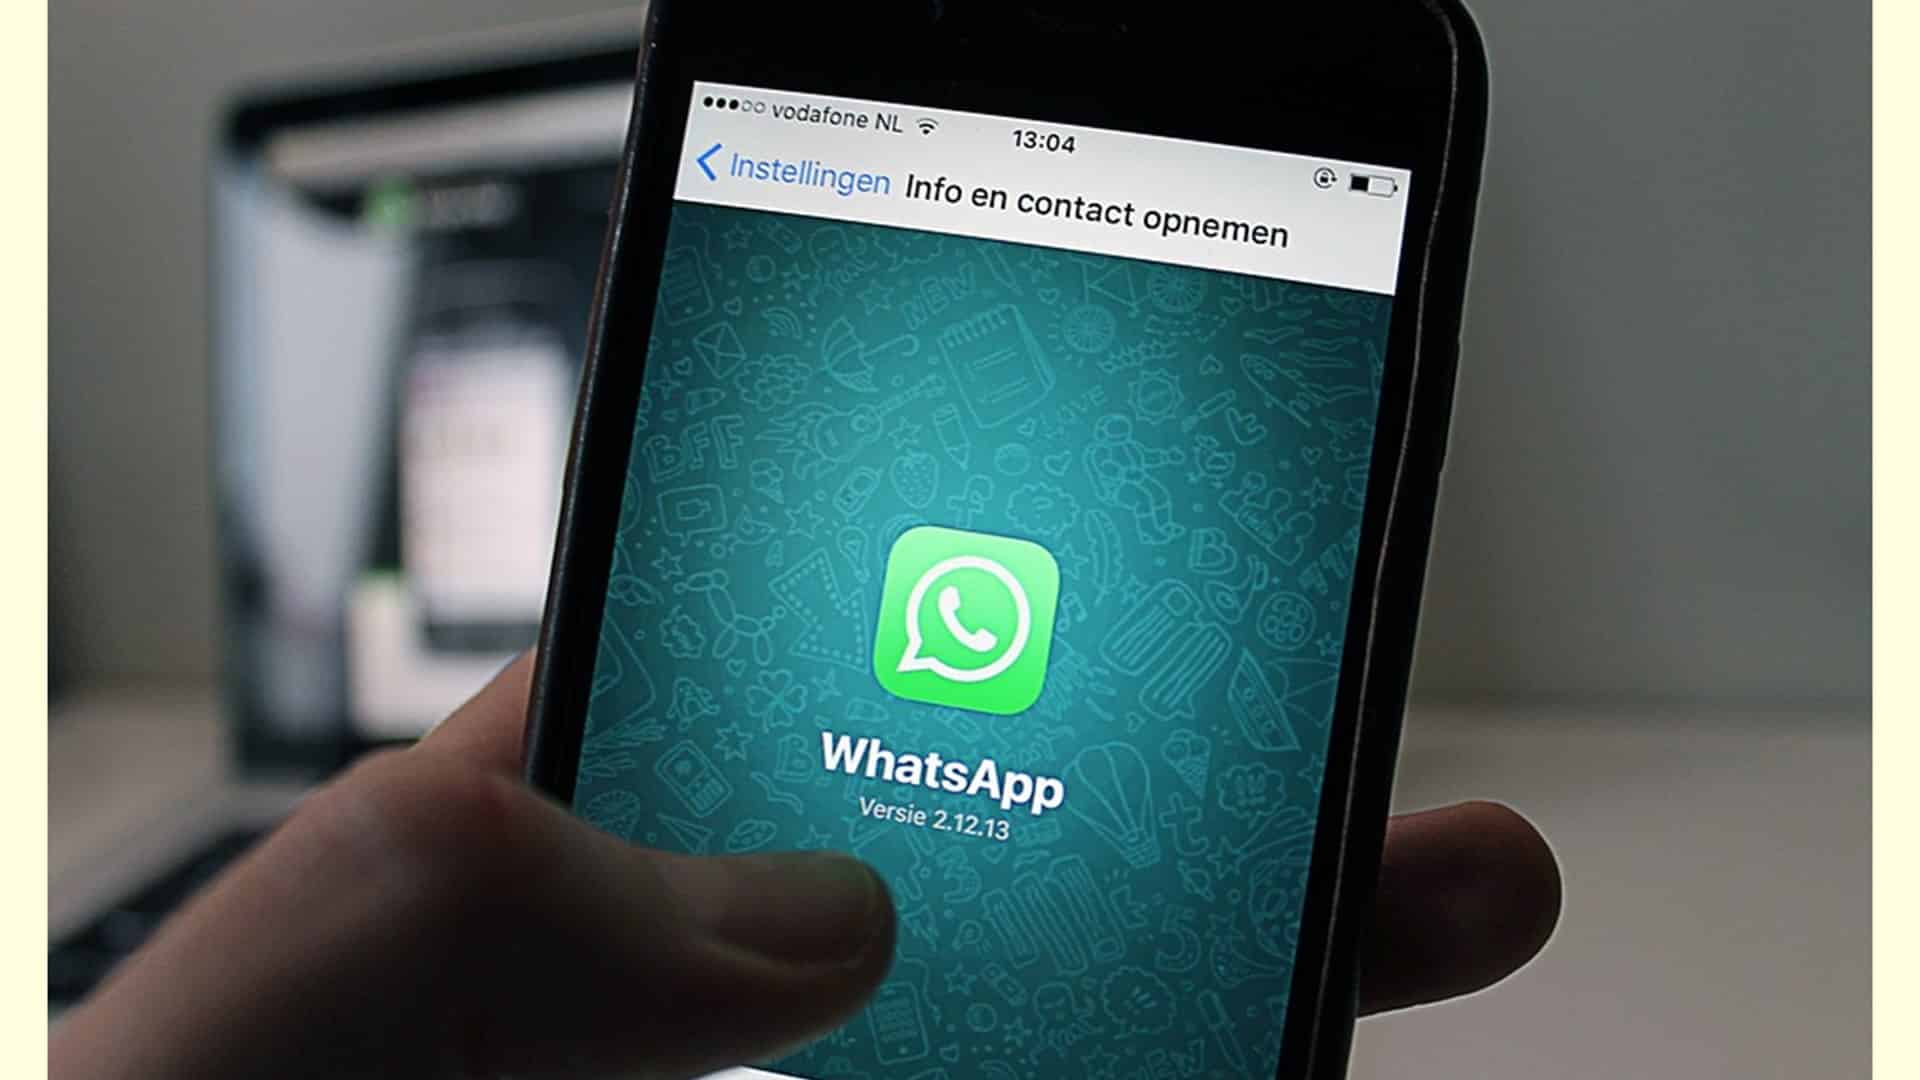 WhatsApp's new feature allows chat history transfer between Android and iOS